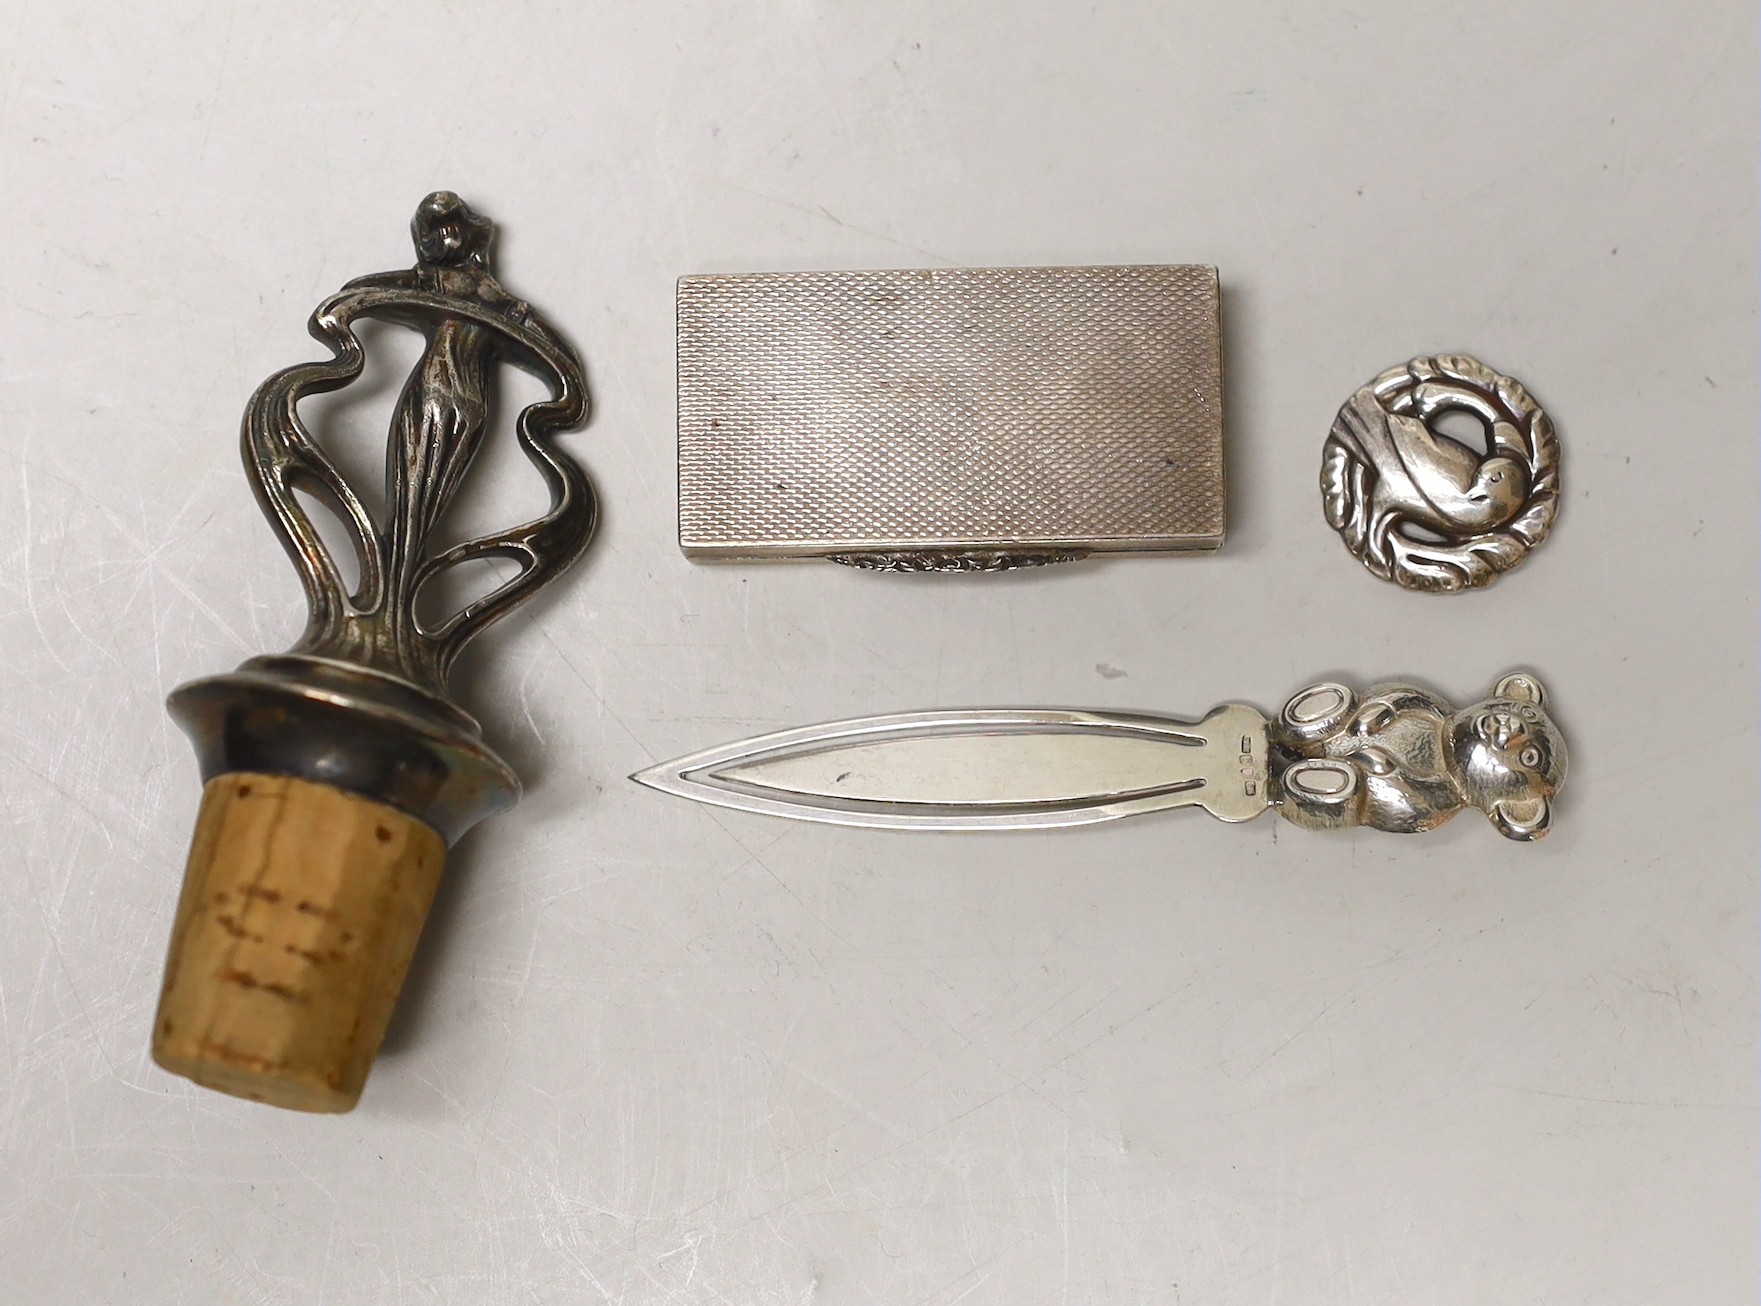 An Art Nouveau metal mounted cork stopper, a Georg Jensen sterling brooch, no. 191, an engine turned silver box and novelty bookmark.                                                                                       